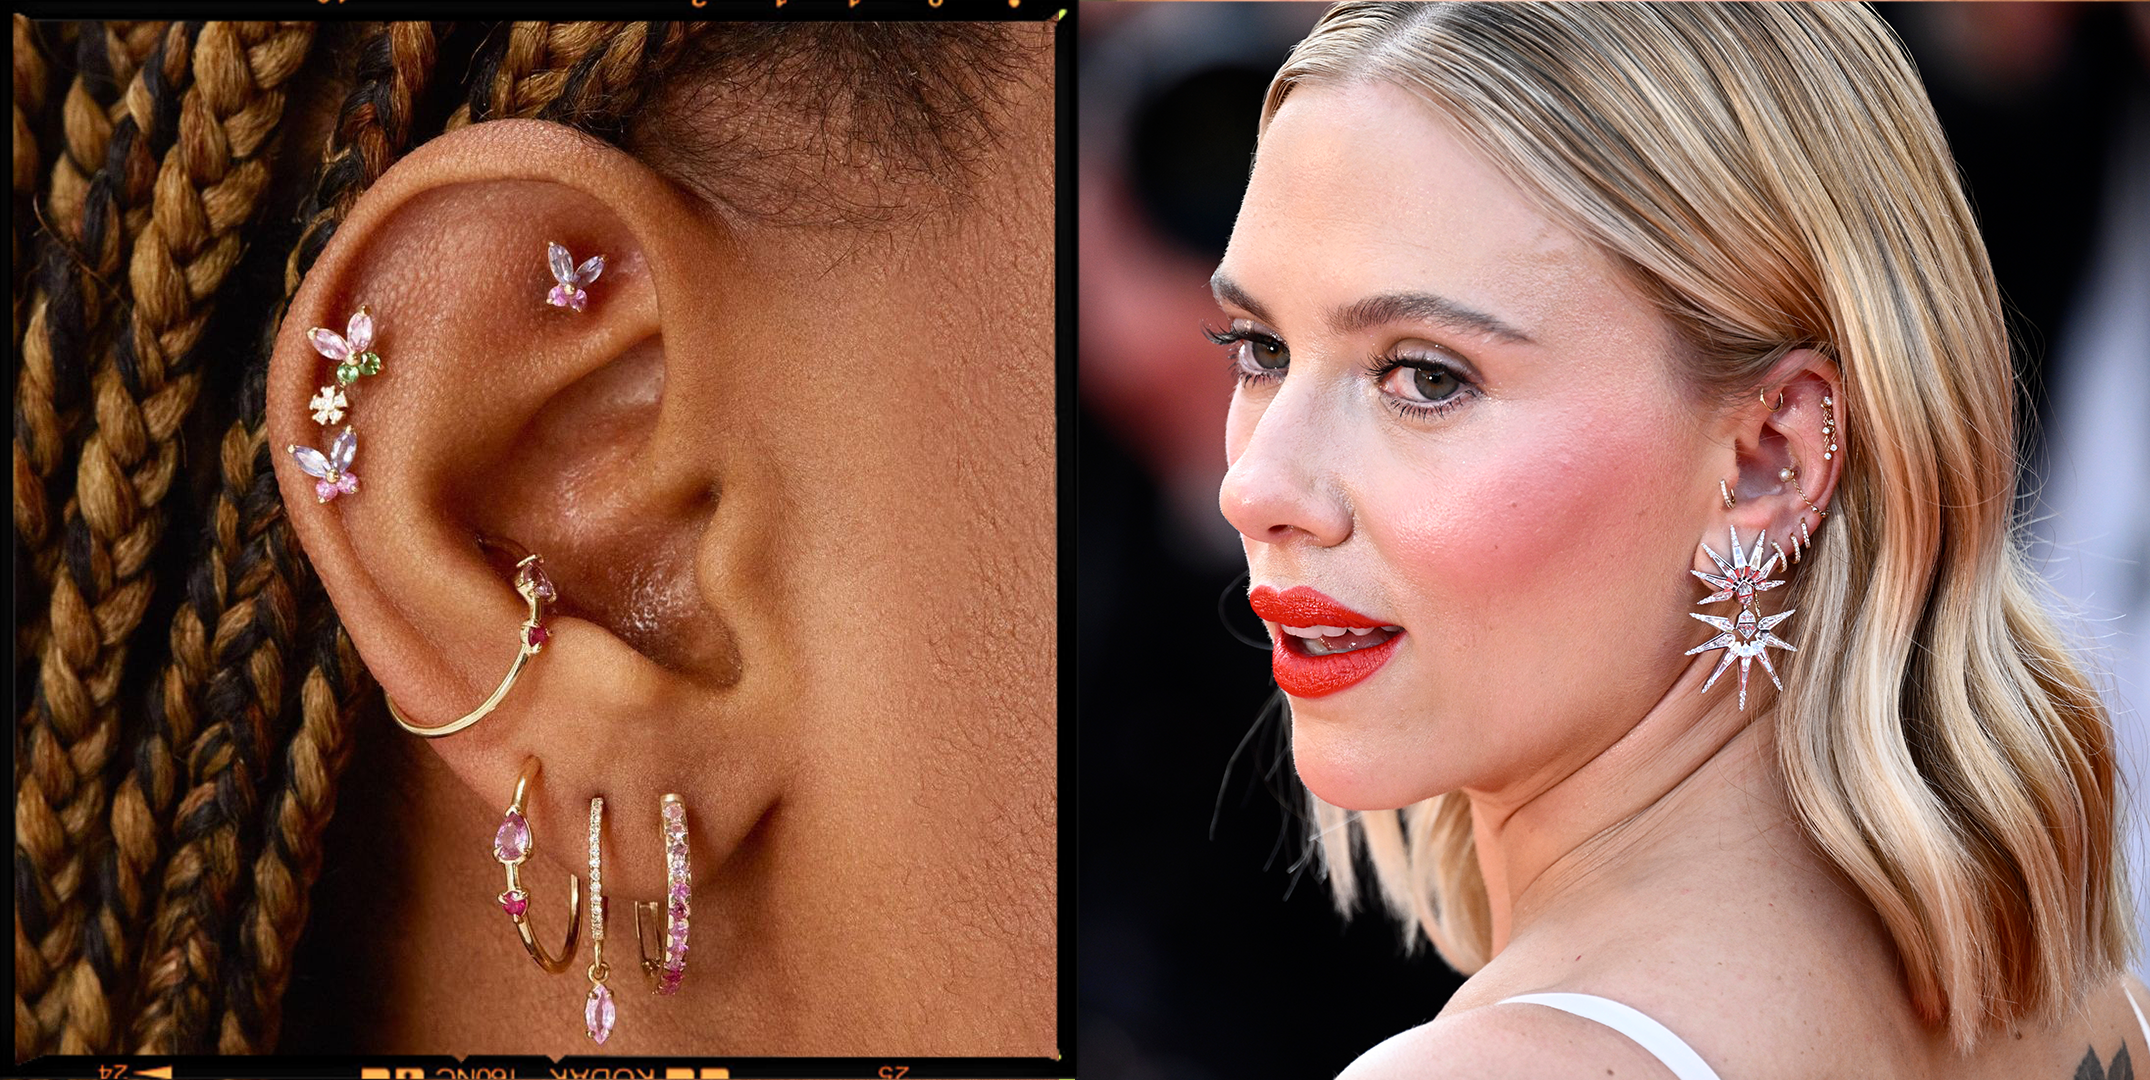 Tragus, Rook, And Helix: Decoding Ear Piercing Names